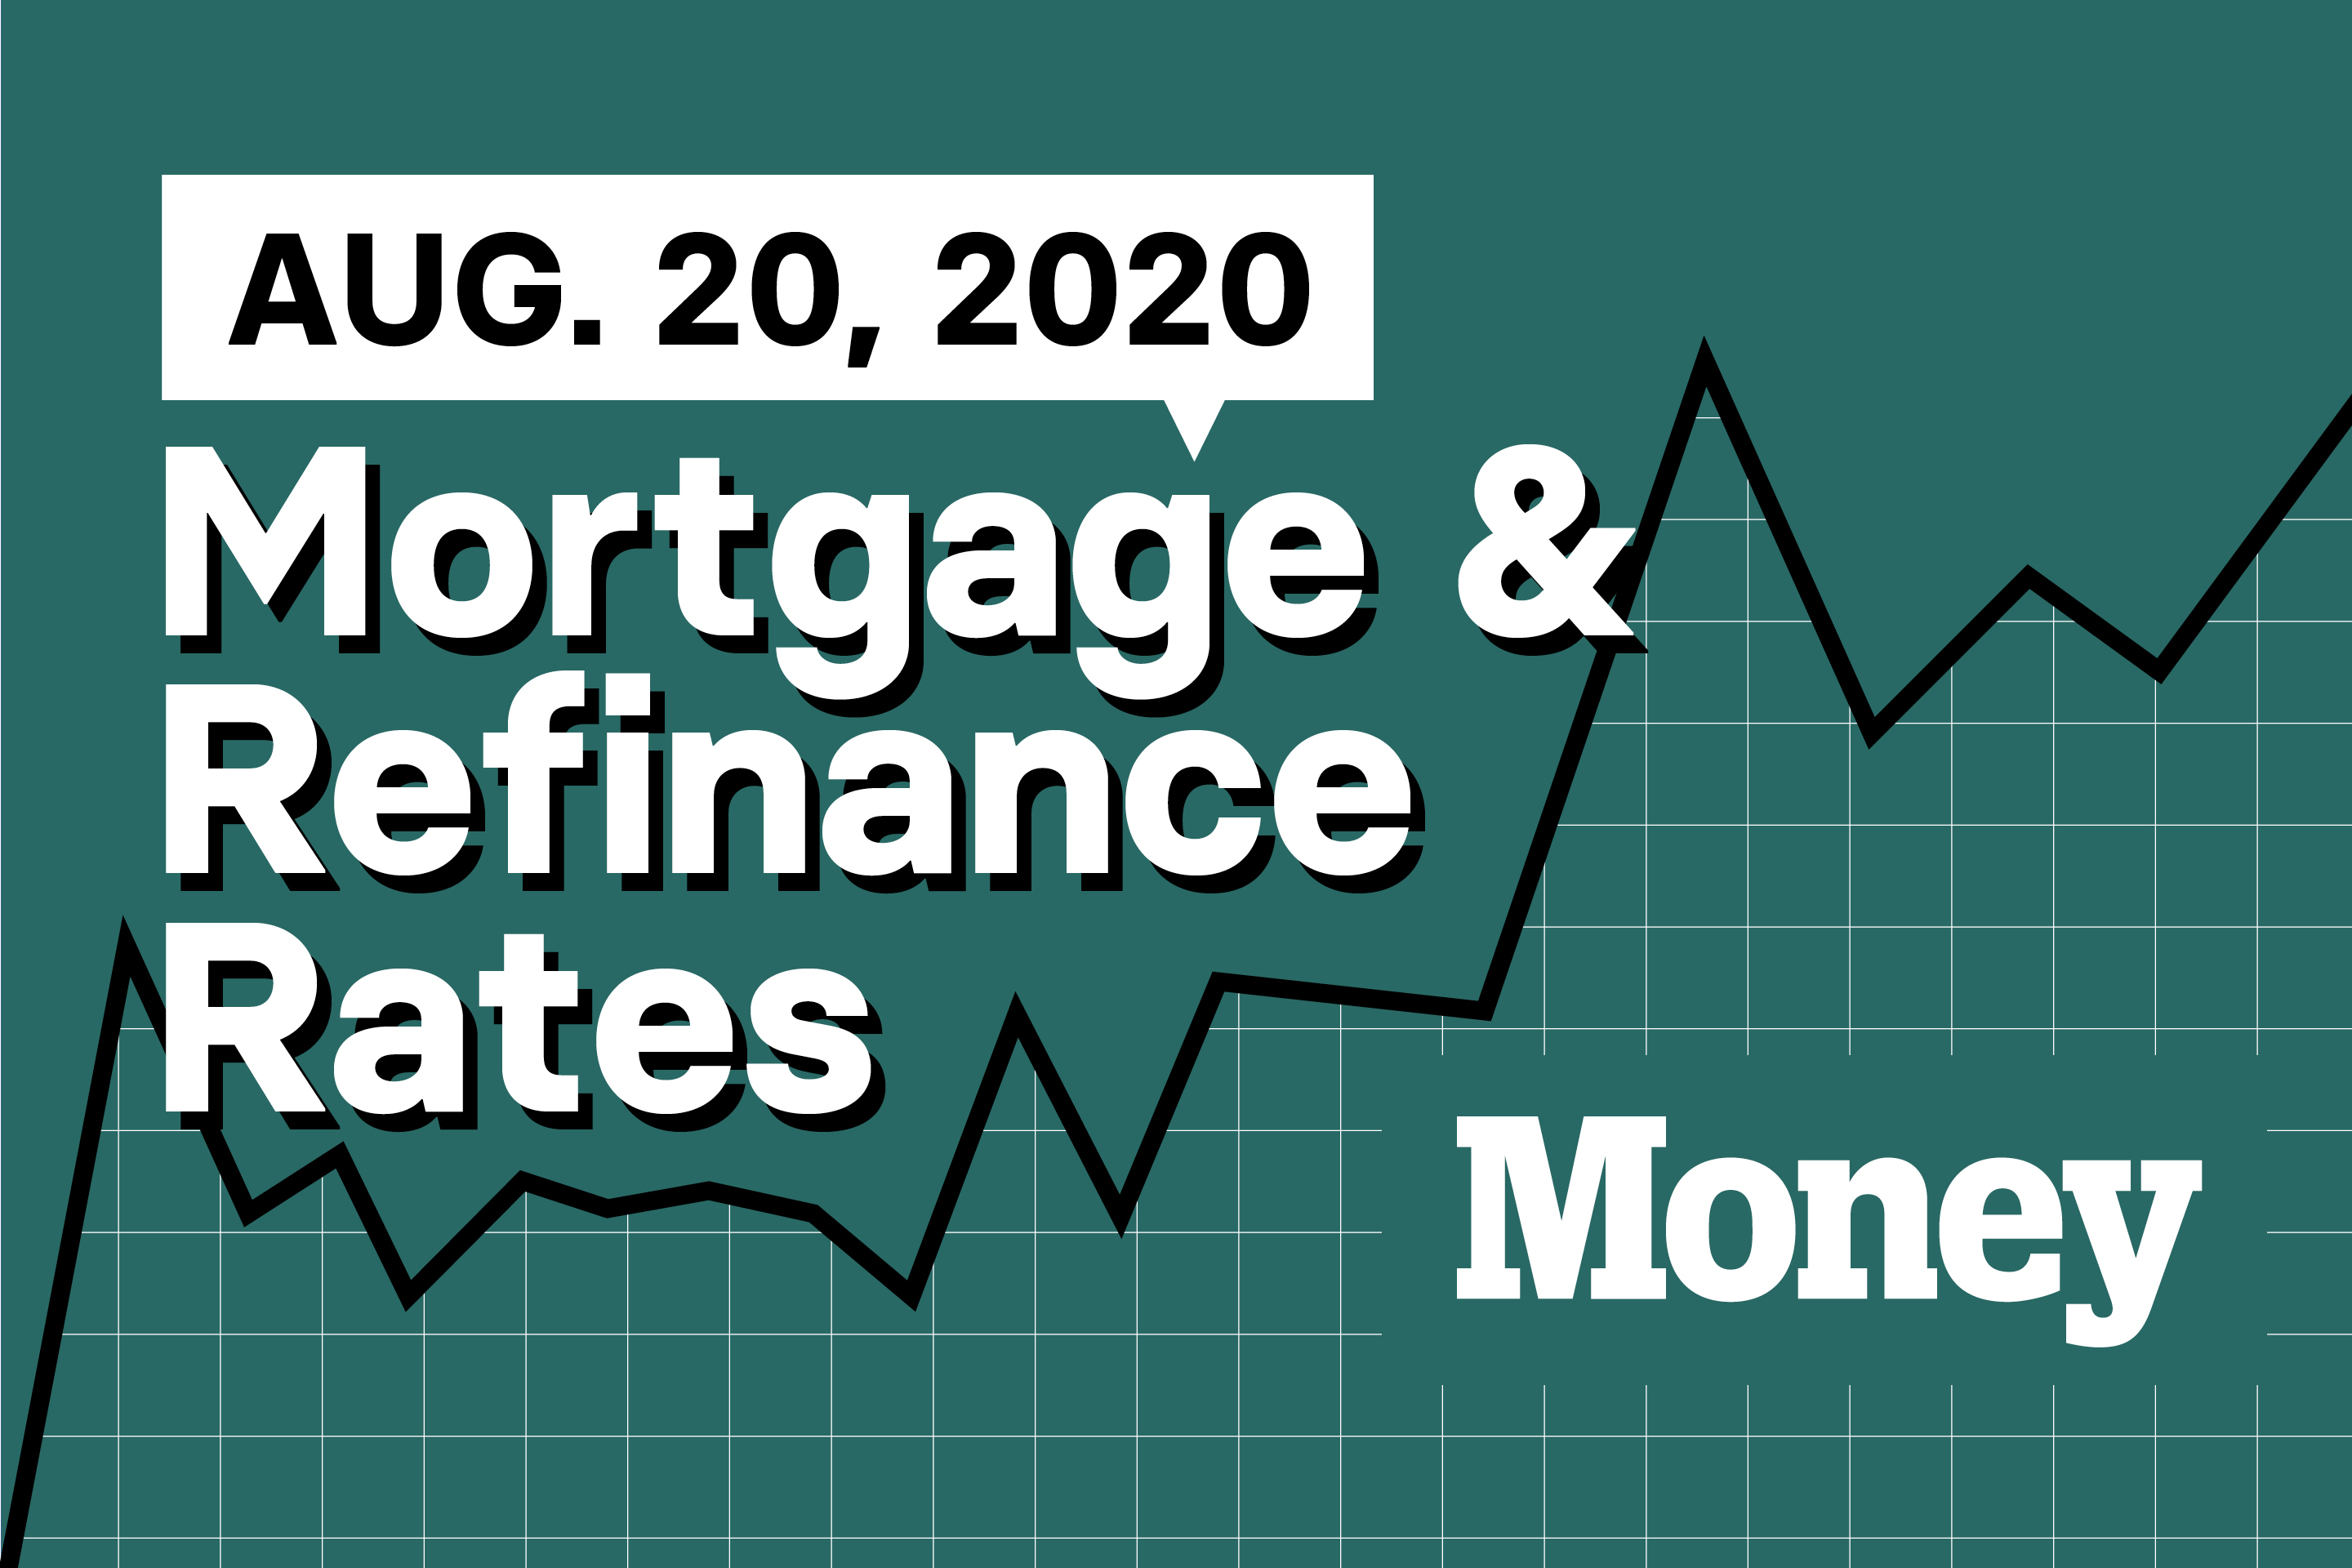 Here Are Today's Best Mortgage & Refinance Rates for August 20, 2020